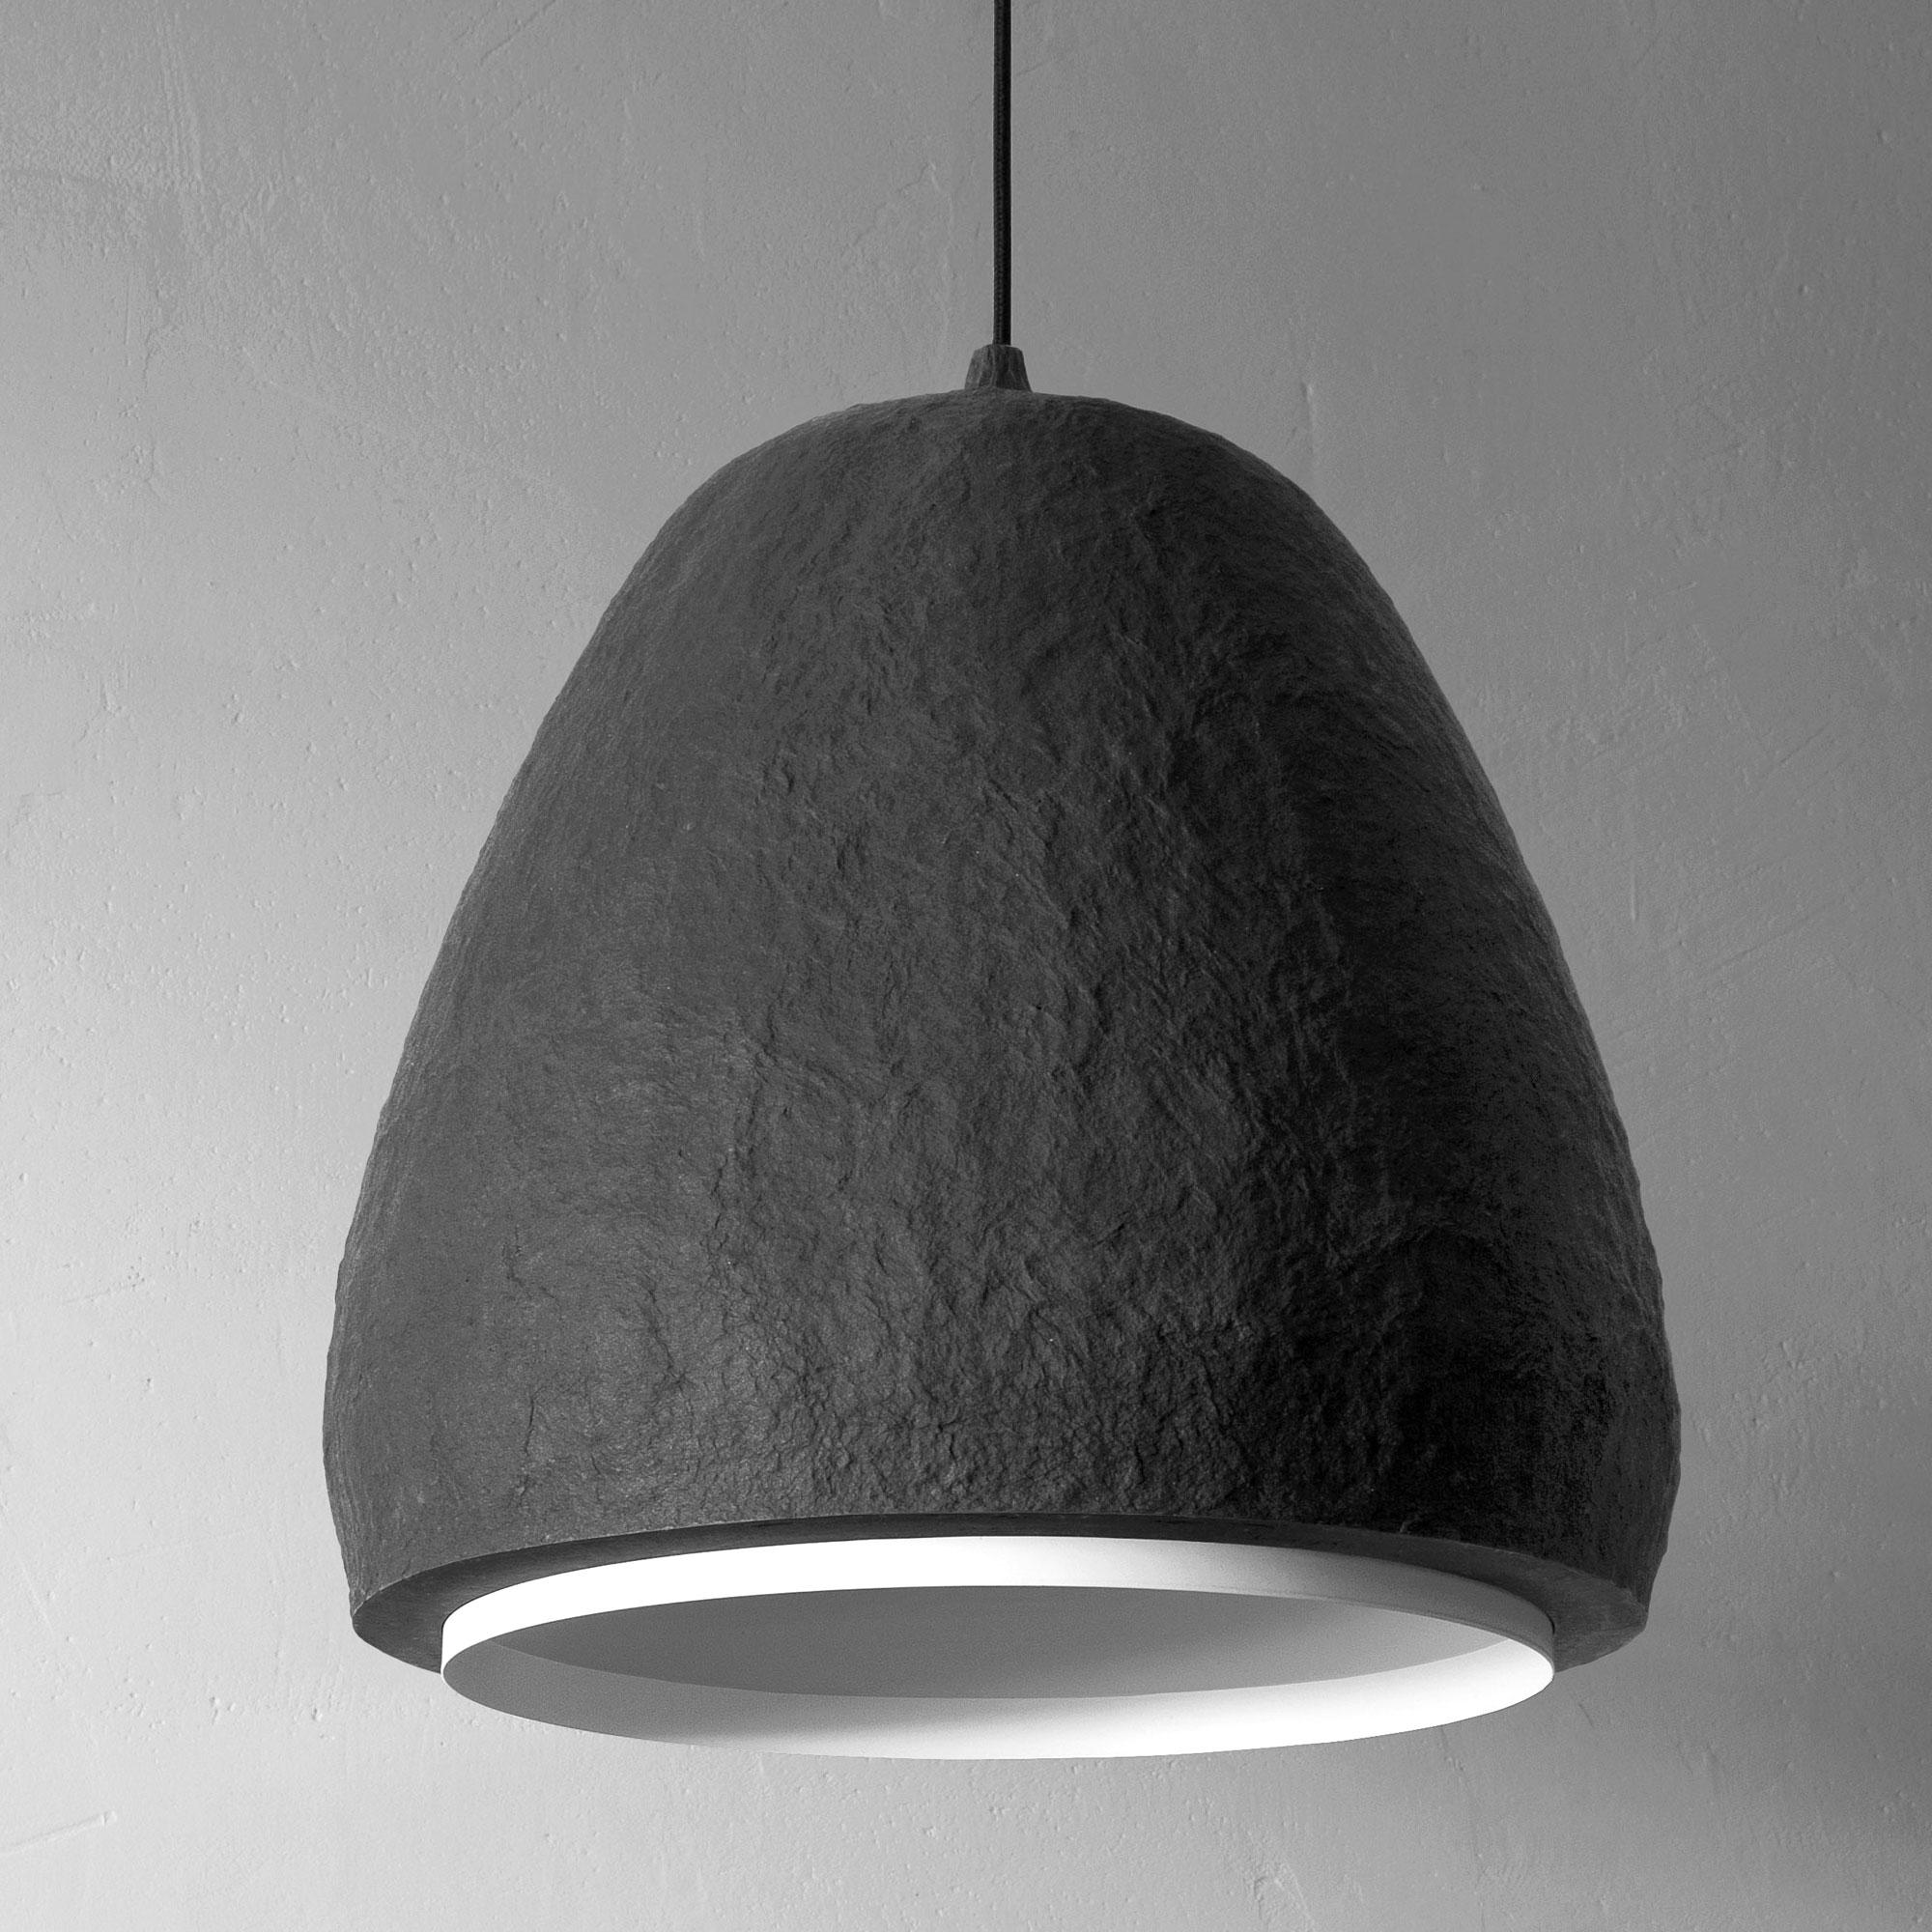 Pendant light “BALANCE”, black, tall

A combination of natural stone-like rigidity and lightness of a cloud. These handmade ceiling lights have a unique character and bring a sense of harmony. The ceiling lights are a versatile fit for spaces of